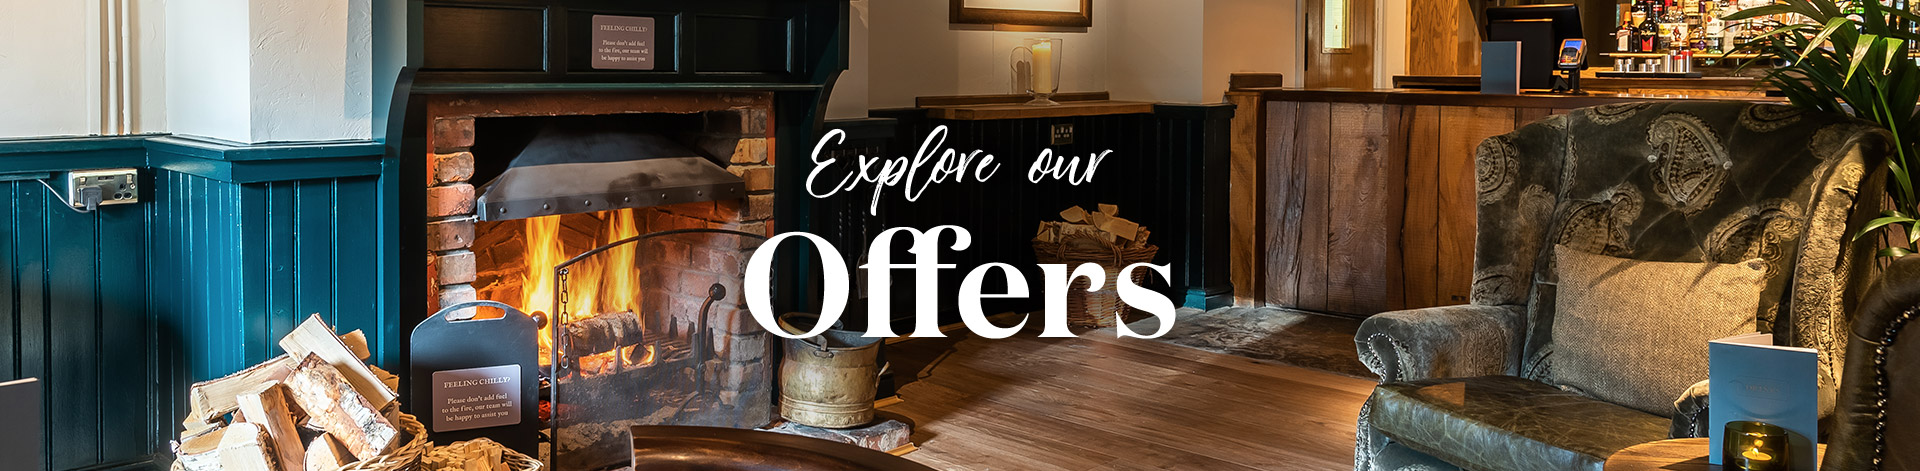 Our latest offers at The Colney Fox